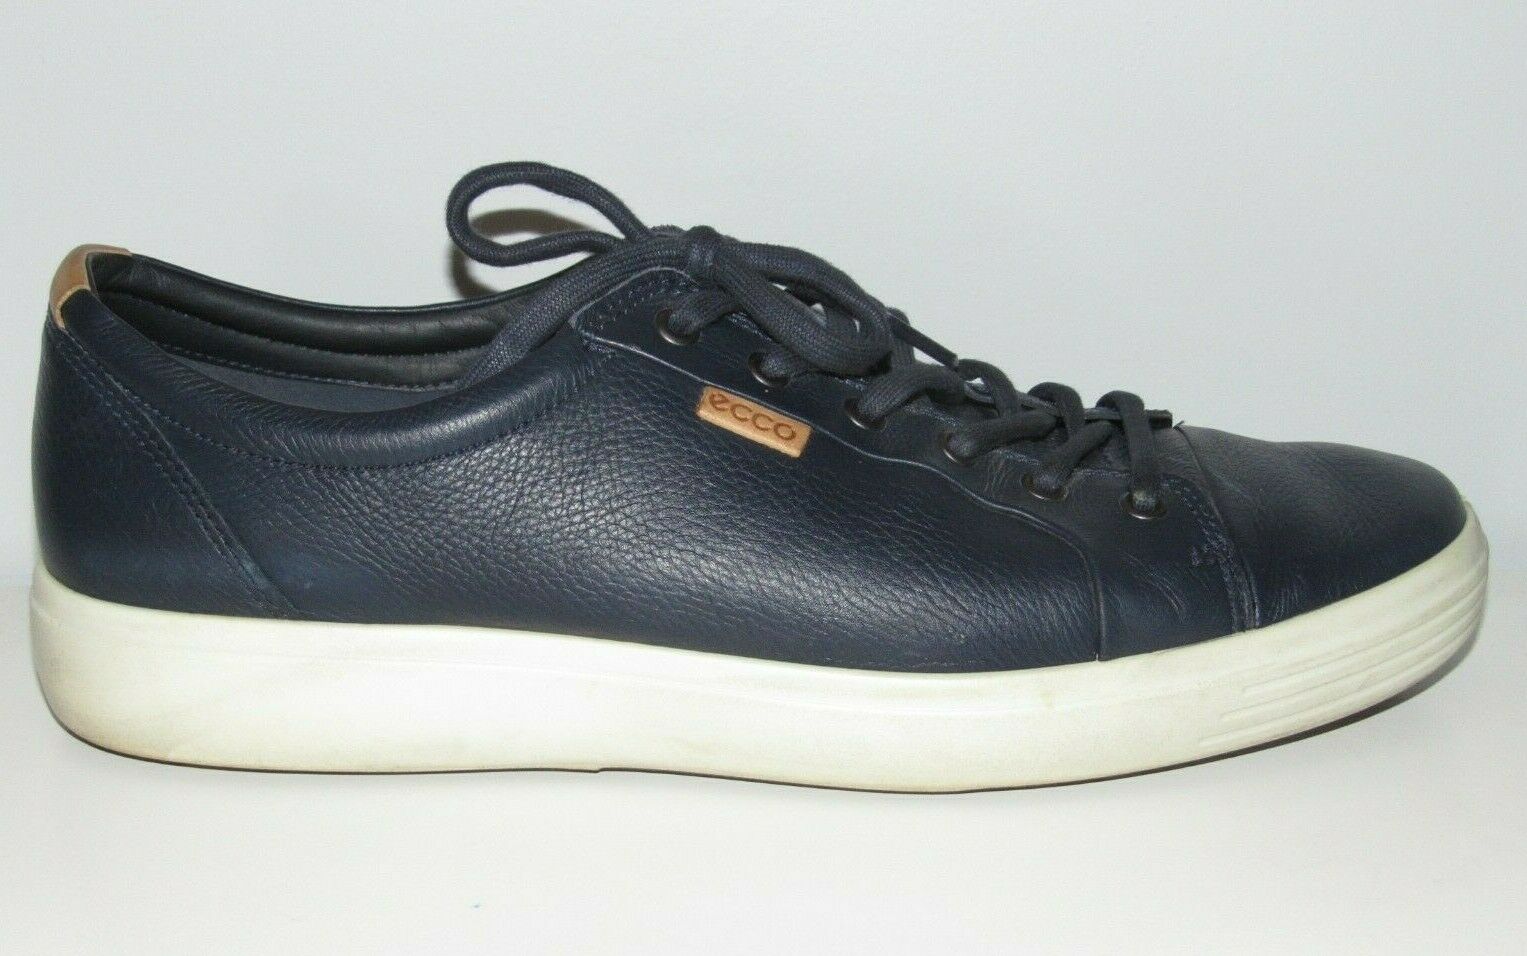 ECCO MENS EURO 47 US 13 SOFT 7 CITY SNEAKERS SHOES LACE UP LEATHER